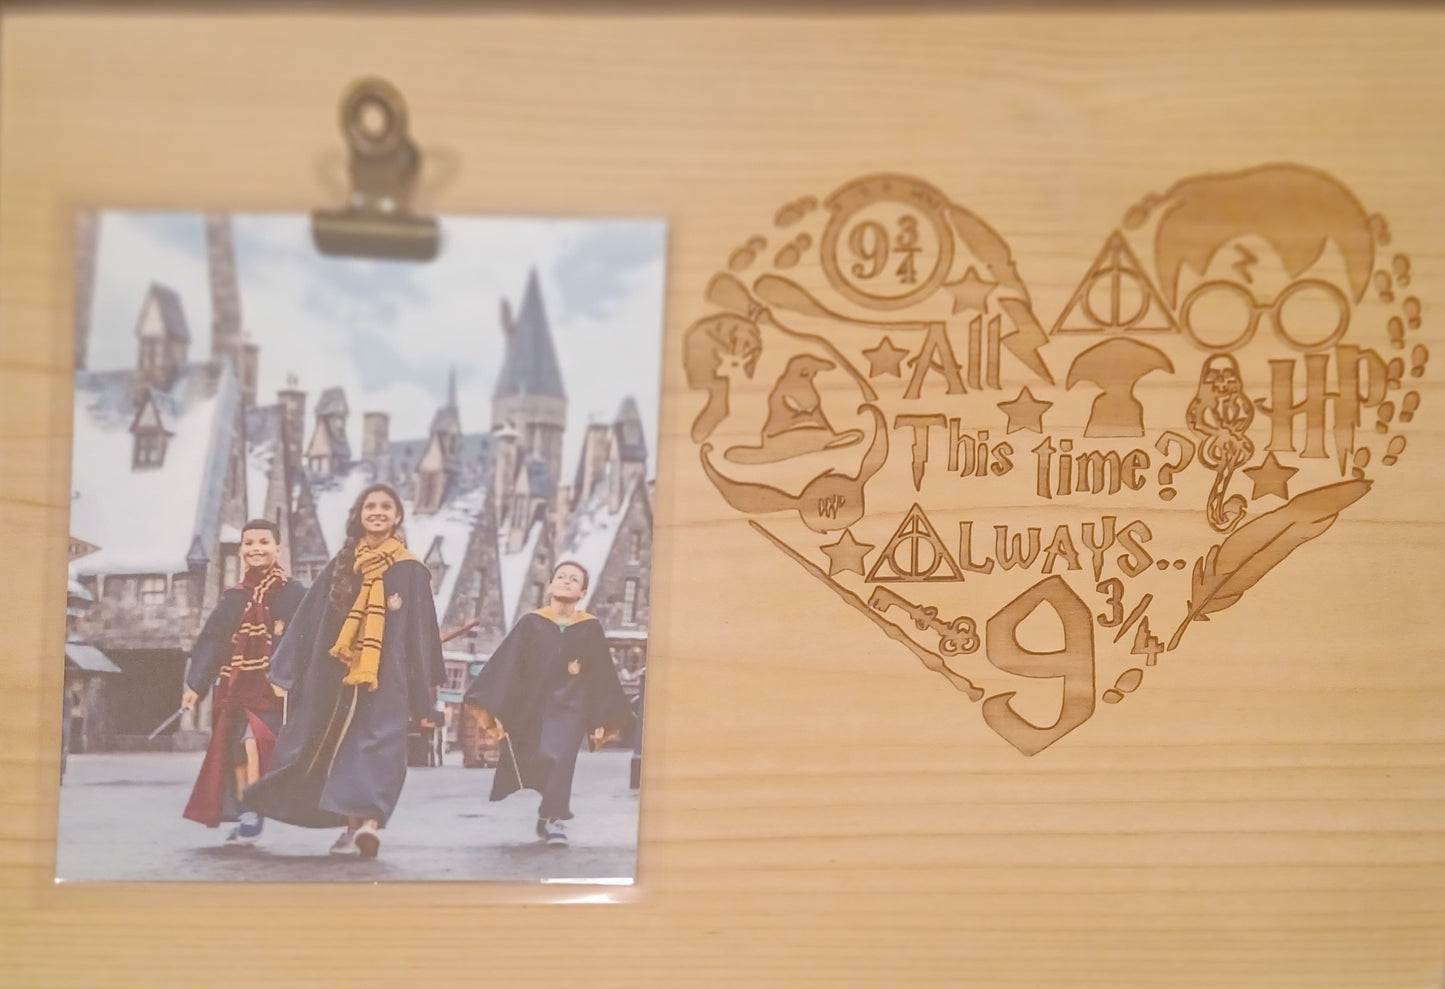 Harry Potter Heart Picture Frame